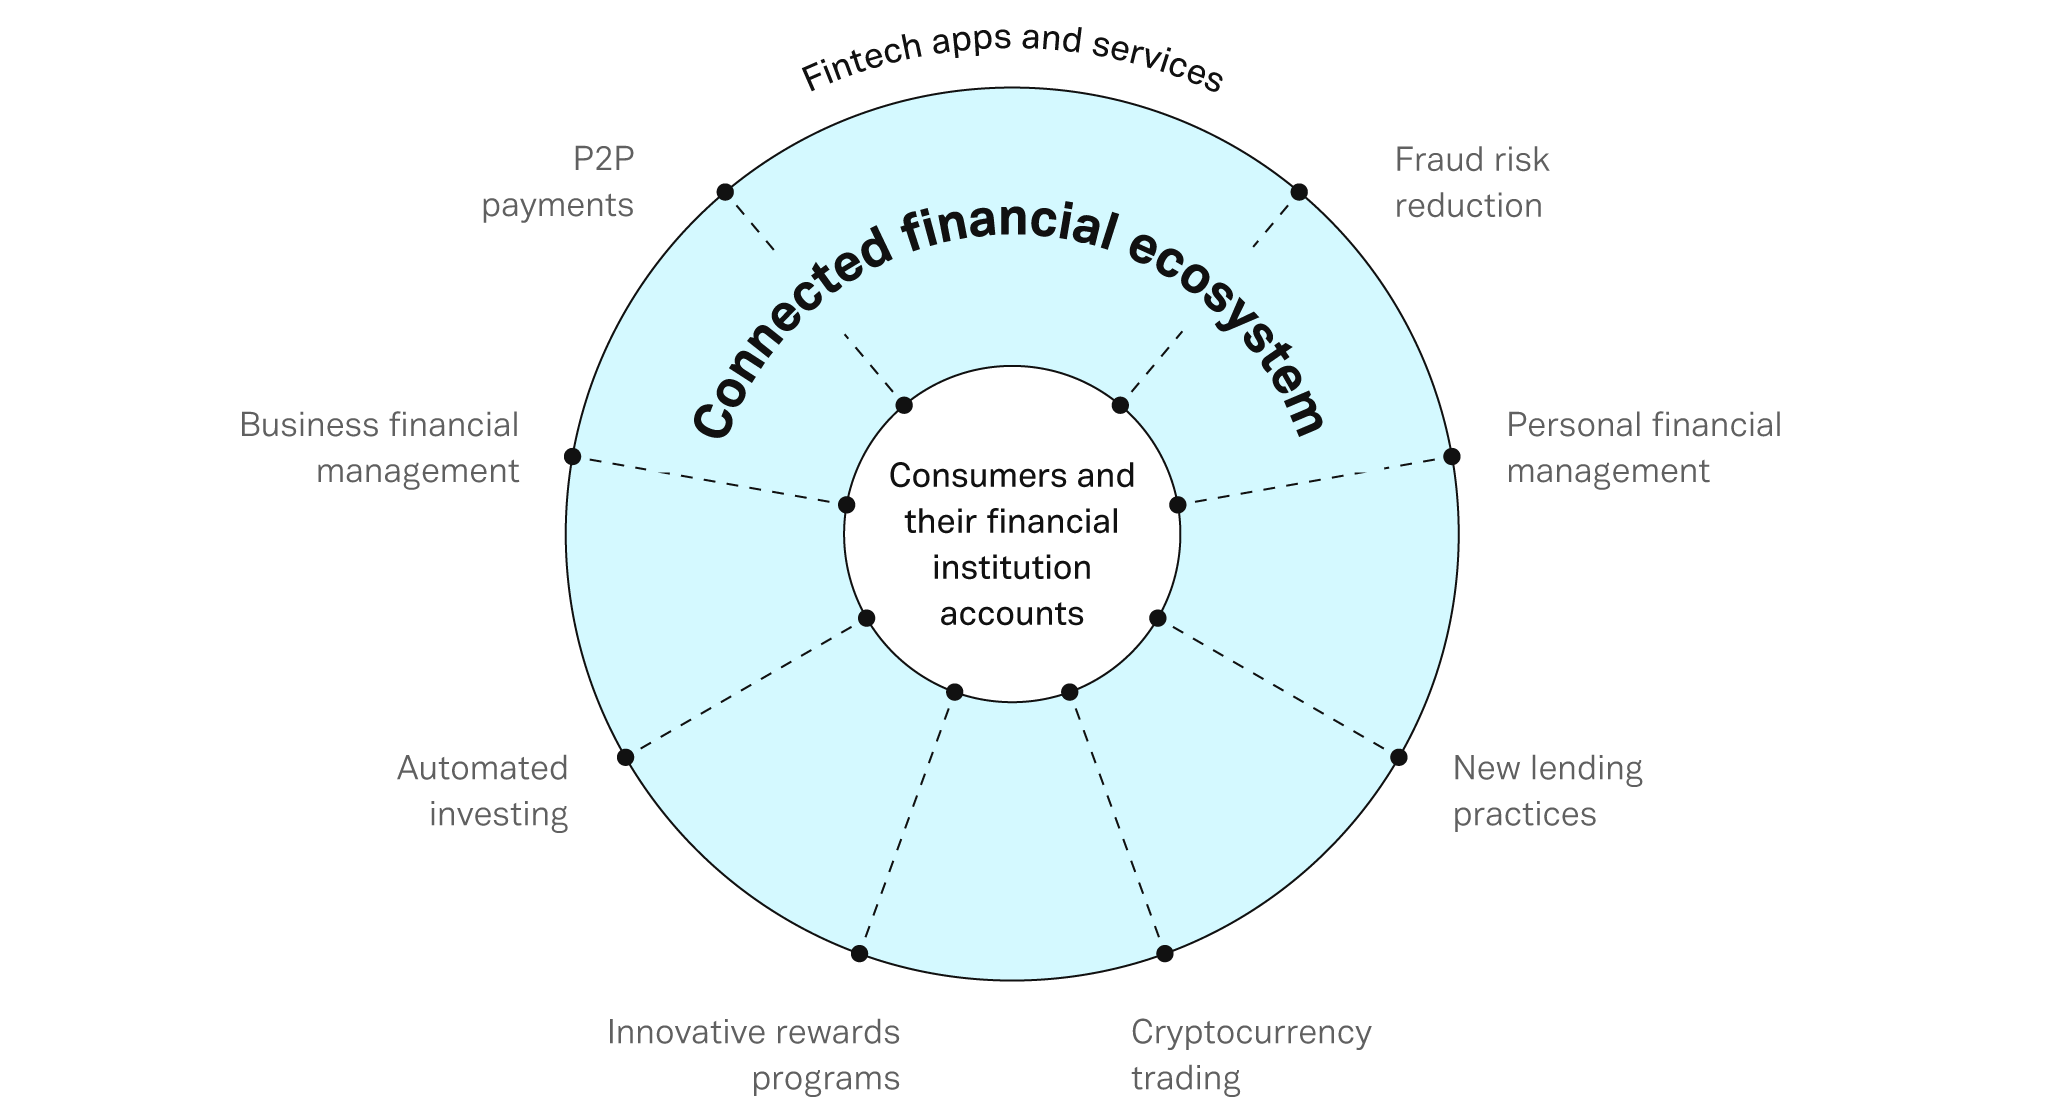 Connected financial ecosystem